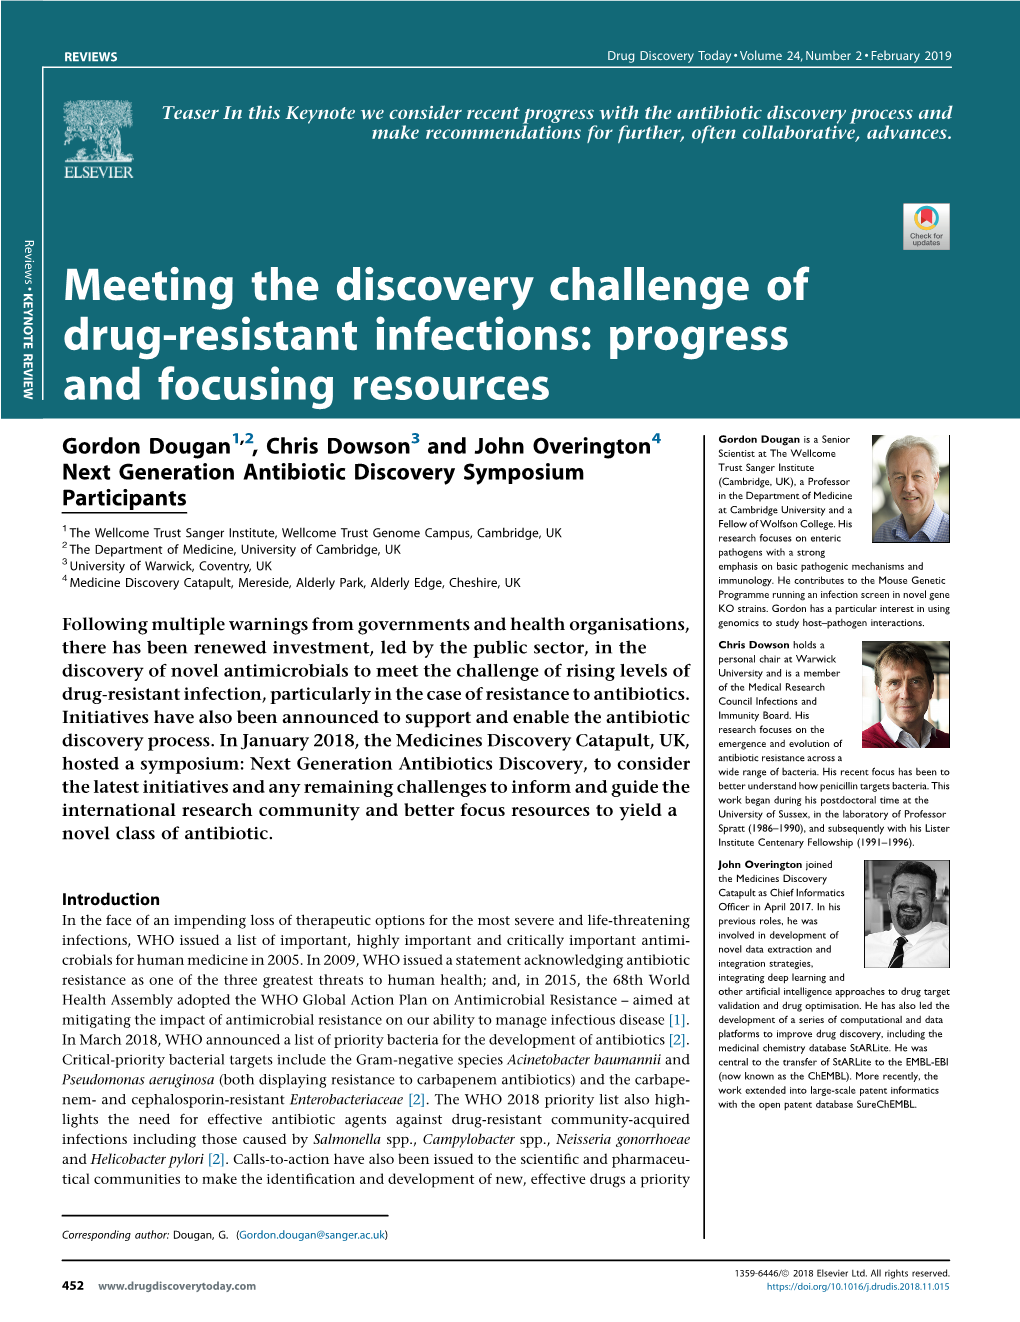 Meeting the Discovery Challenge of Drug-Resistant Infections